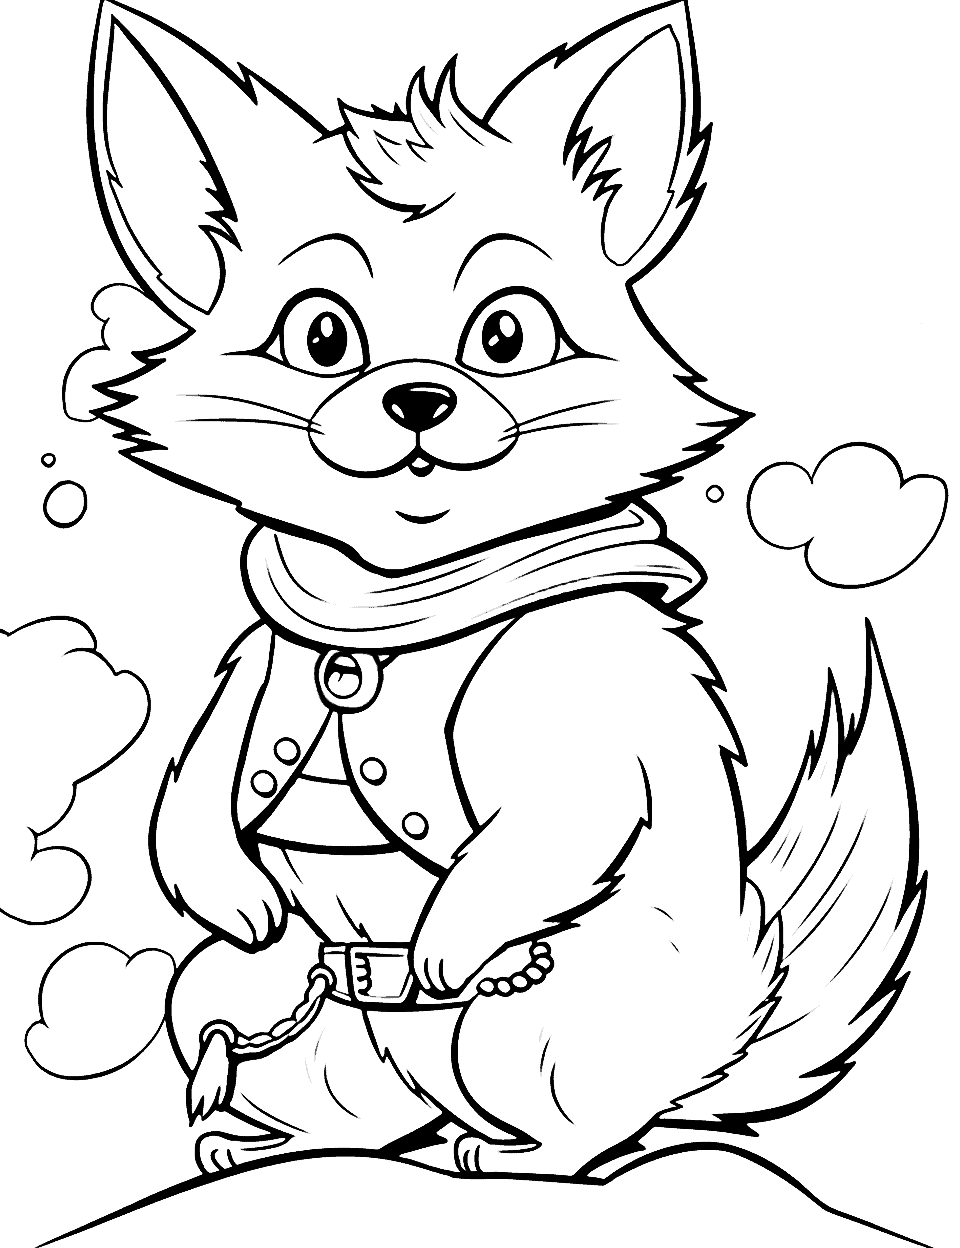 Seafaring Fox Pirate Coloring Page - A fox is ready for high-seas adventures.